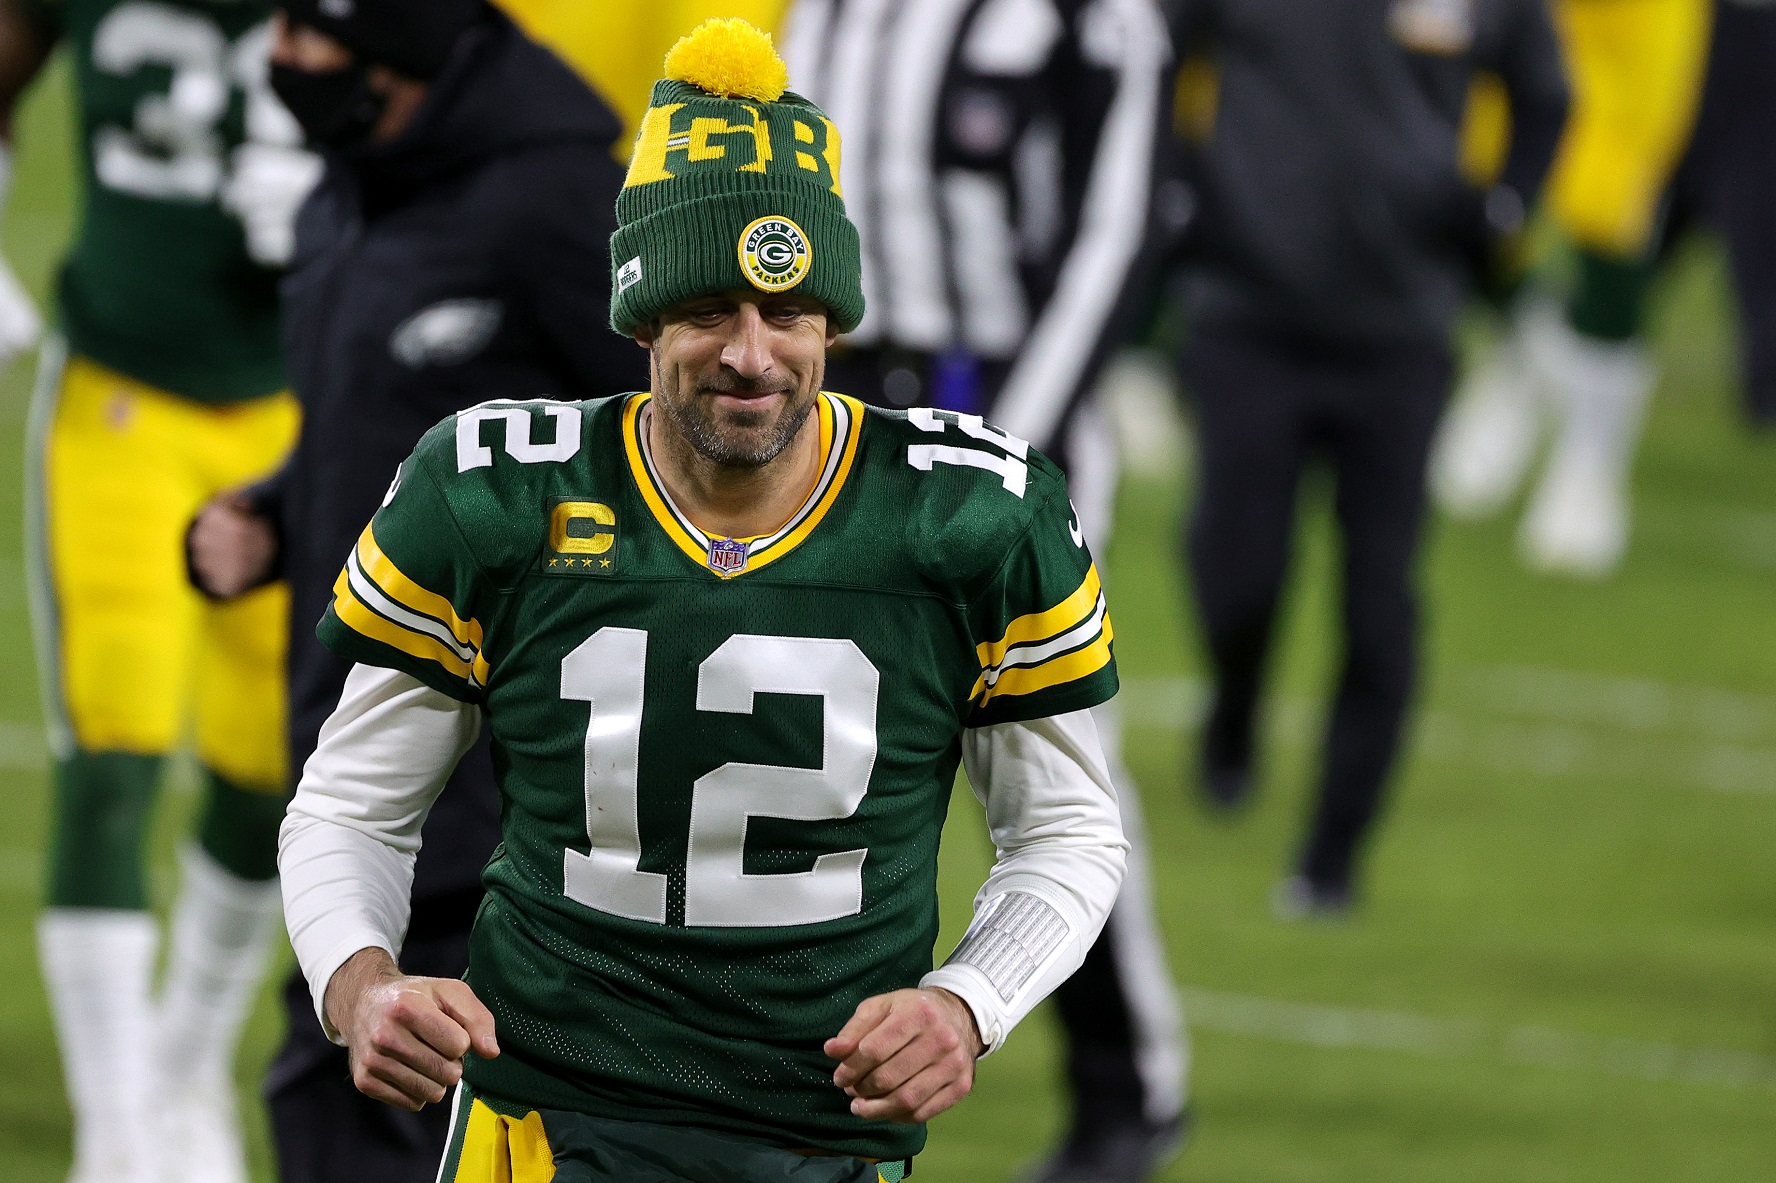 The Most Amazing Statistic Behind Aaron Rodgers' 400 Touchdown Passes